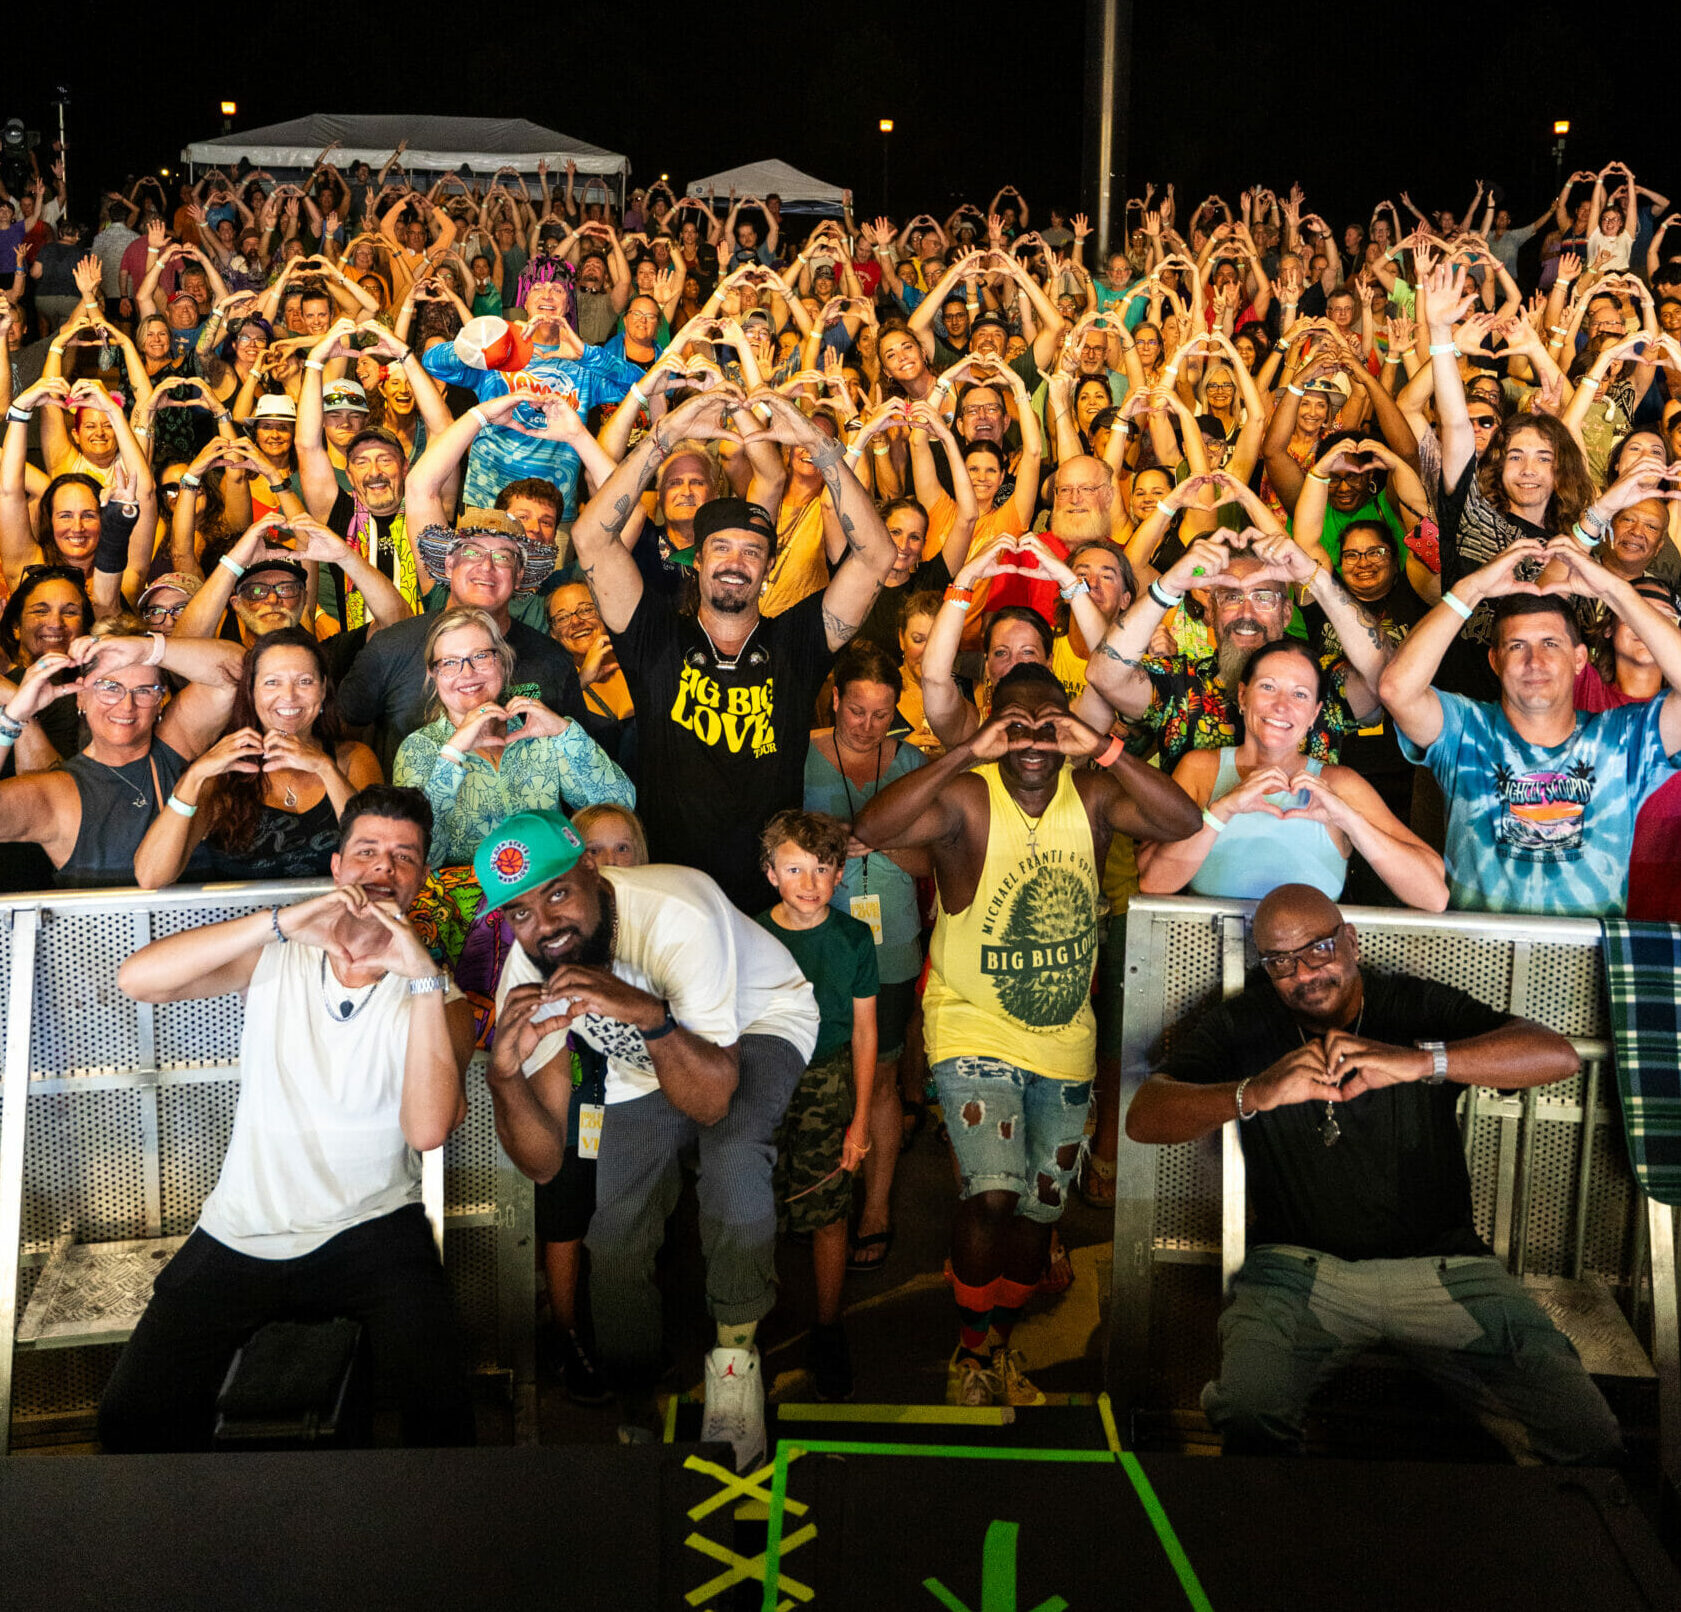 Michael Franti, Spearhead and Audience